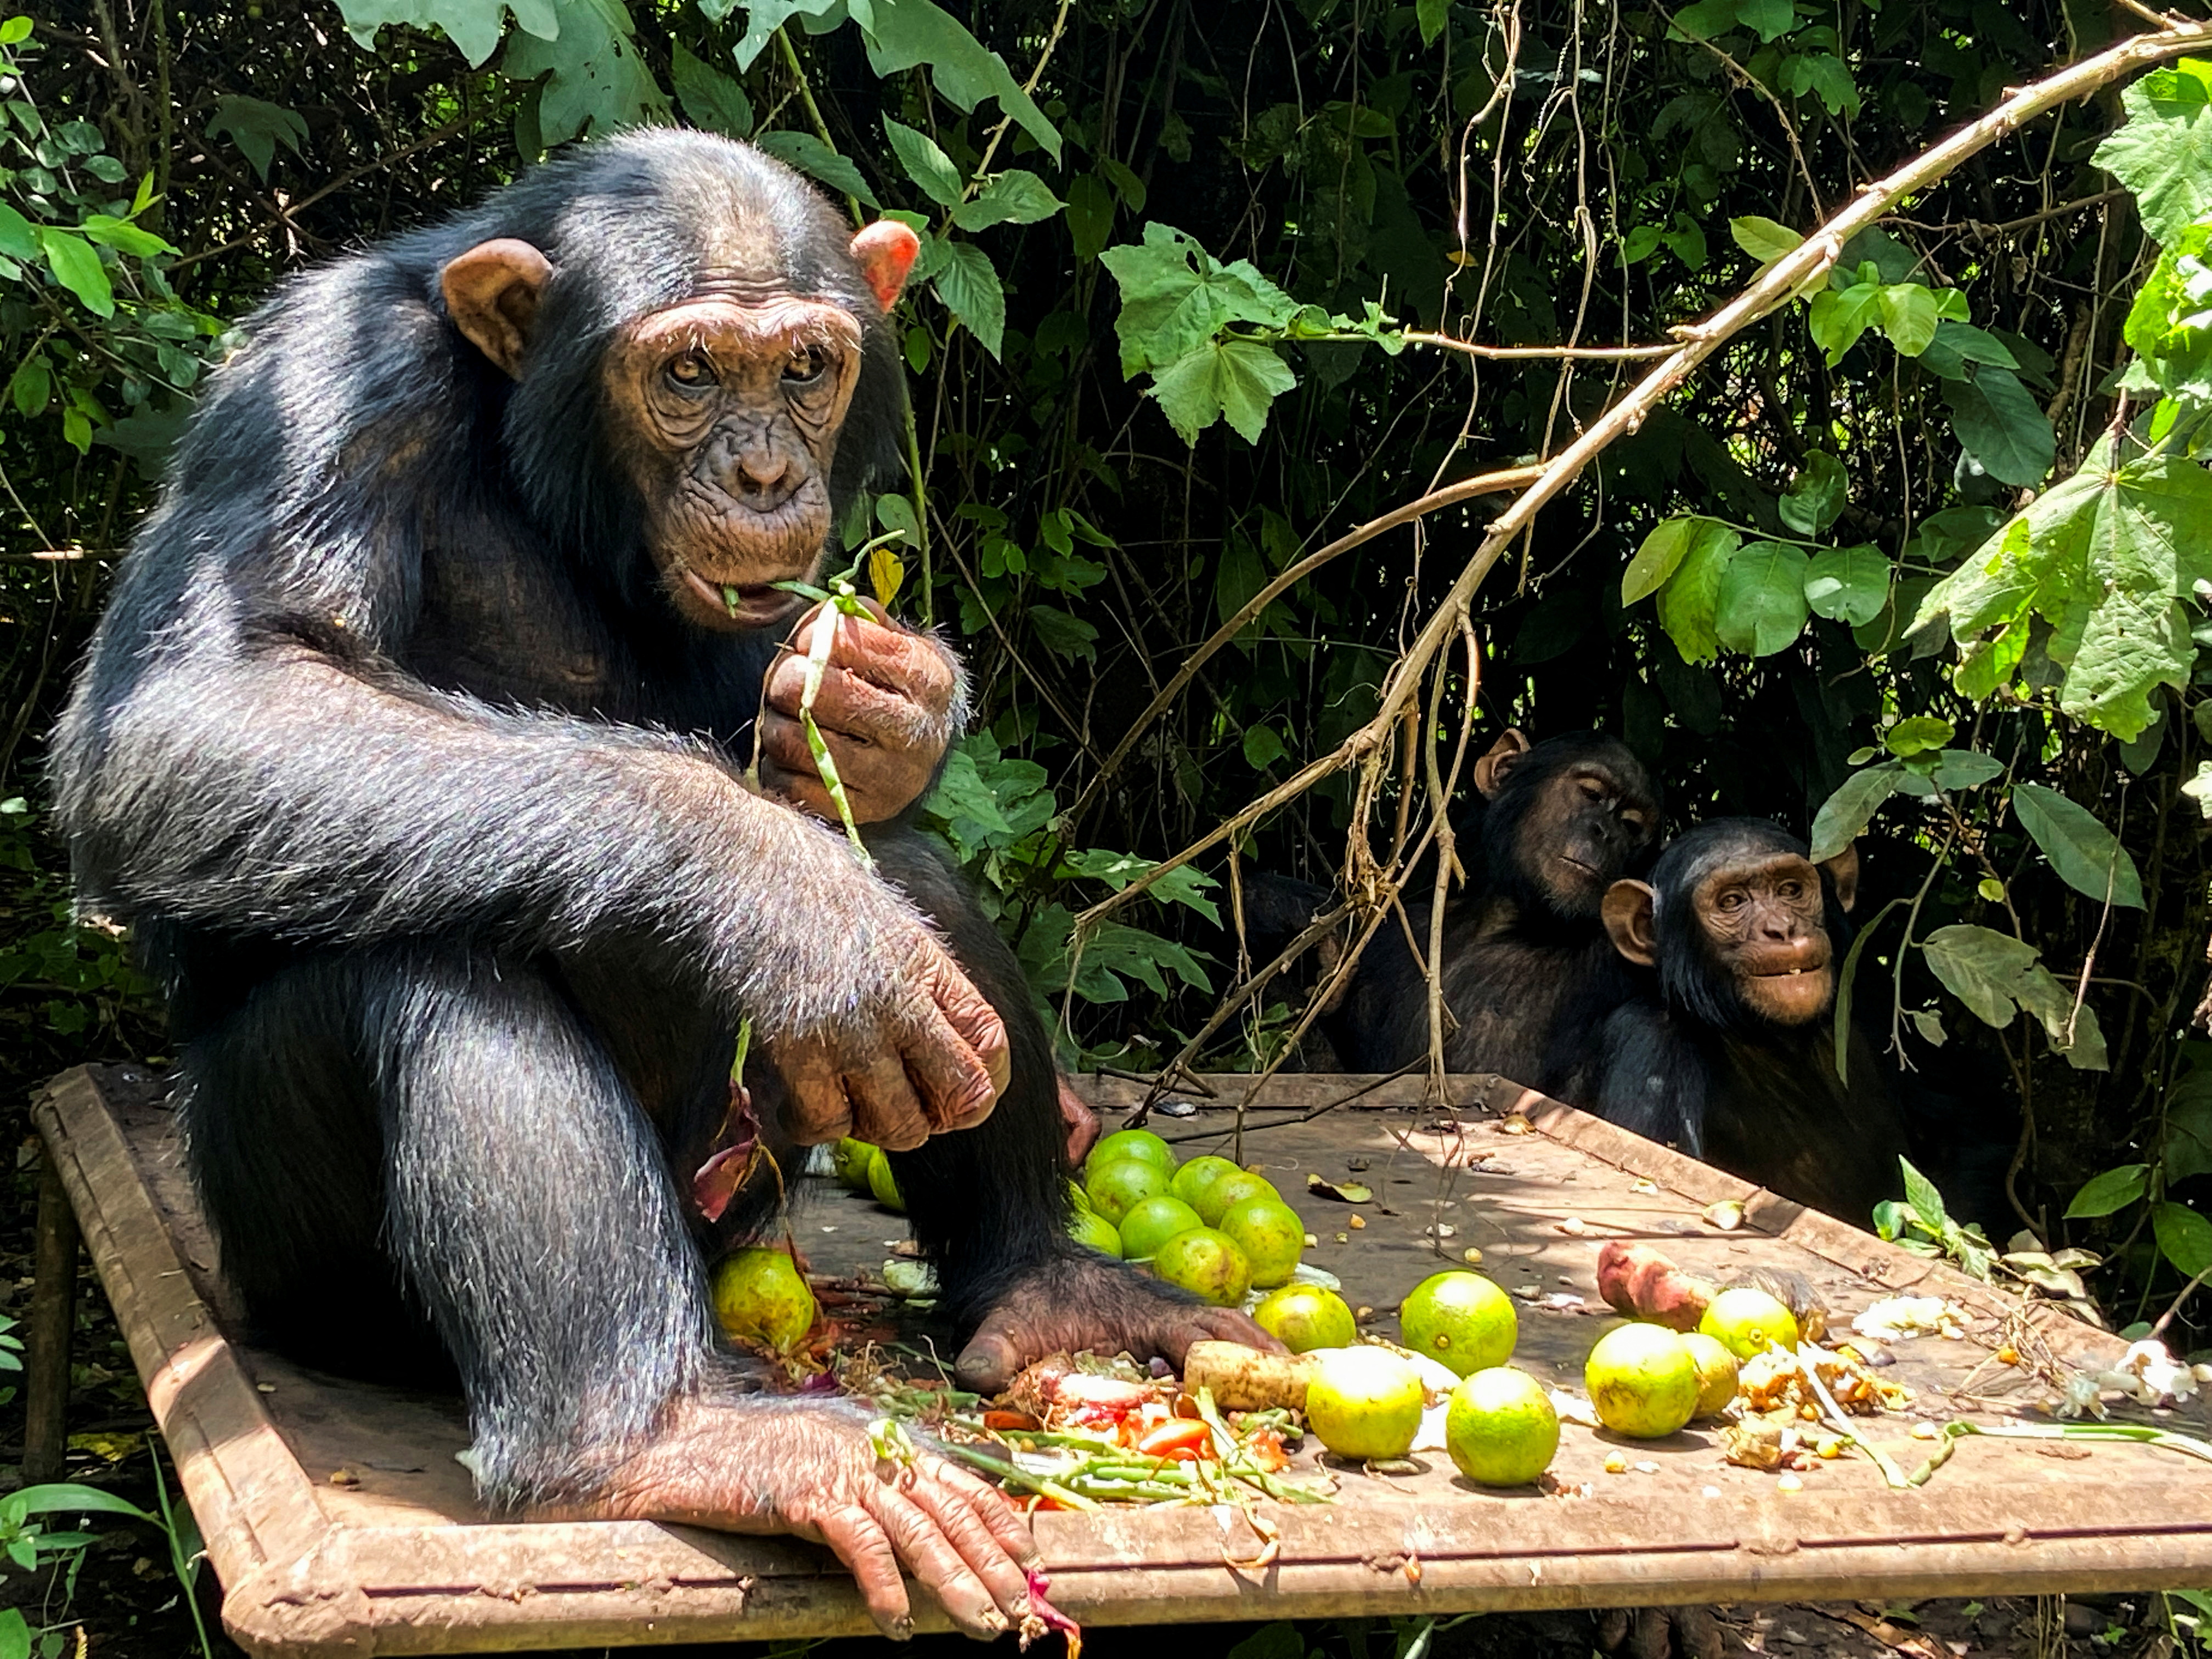 Kisangani, a chimpanzee which arrived in 2017 from Kisangani, eats at the Lwiru Primates Rehabilitation Centre, in South Kivu